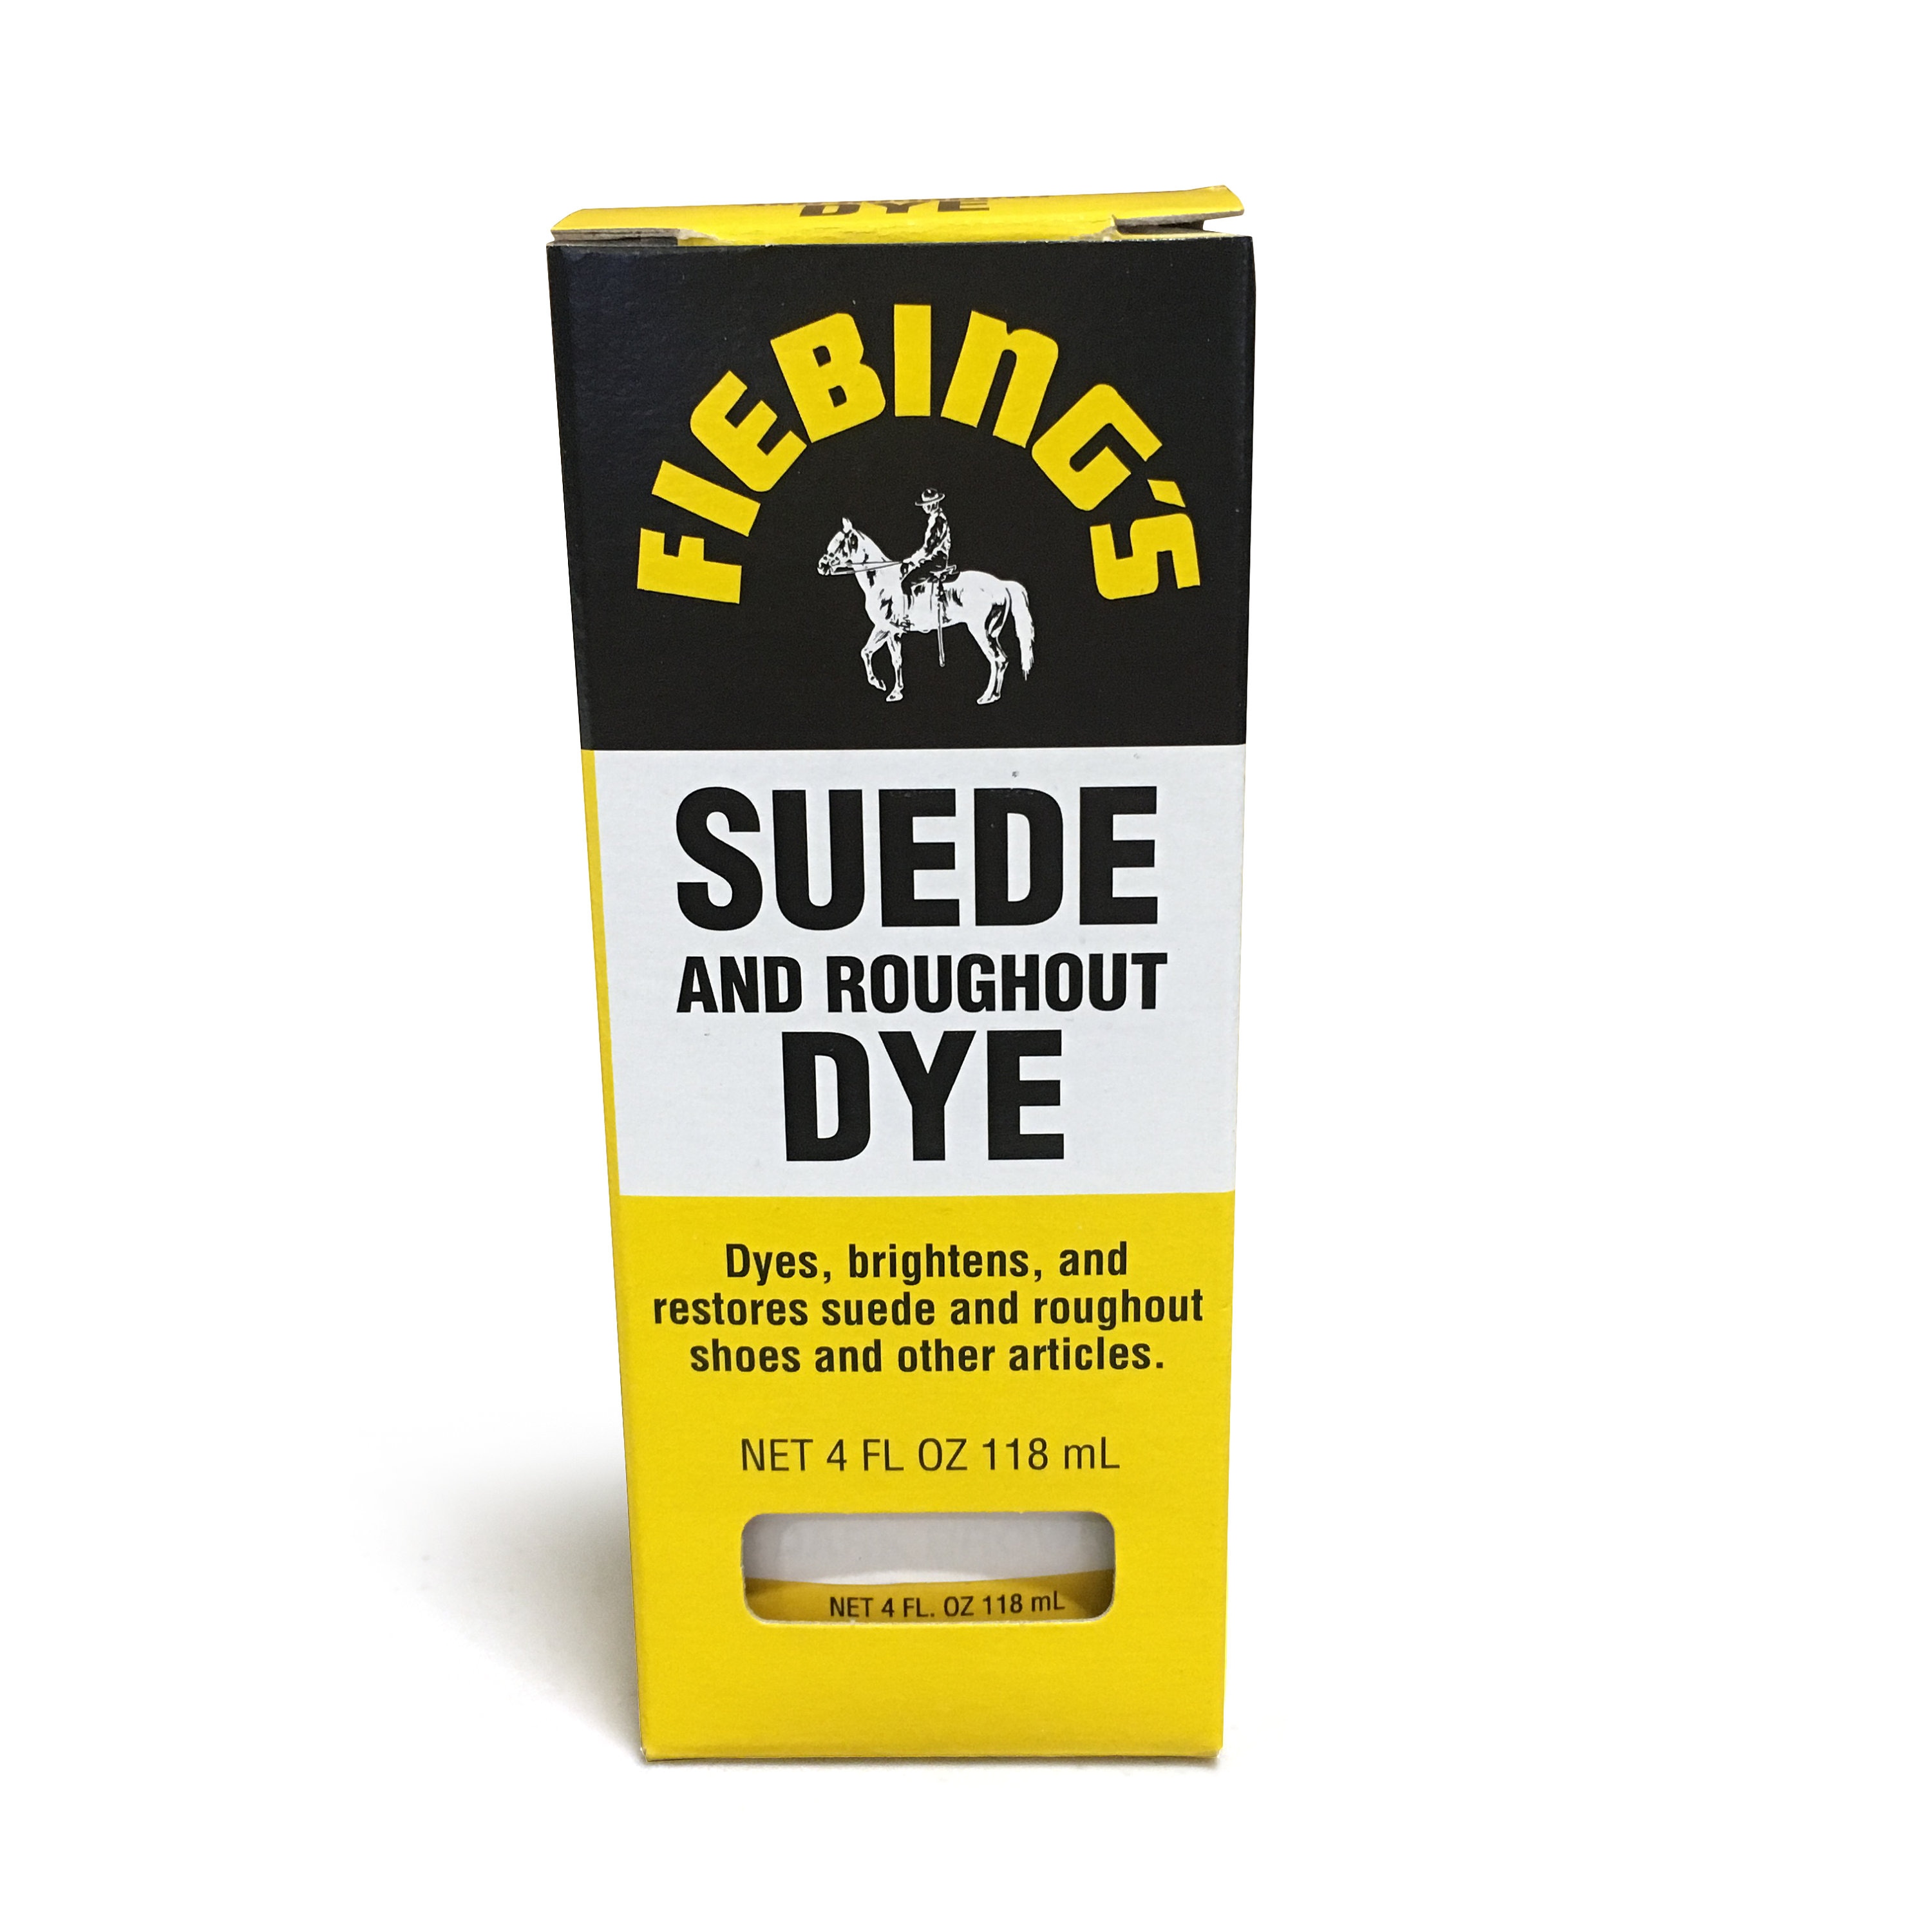 Medium Brown Suede Dye - best suede dye for suede shoes and boots